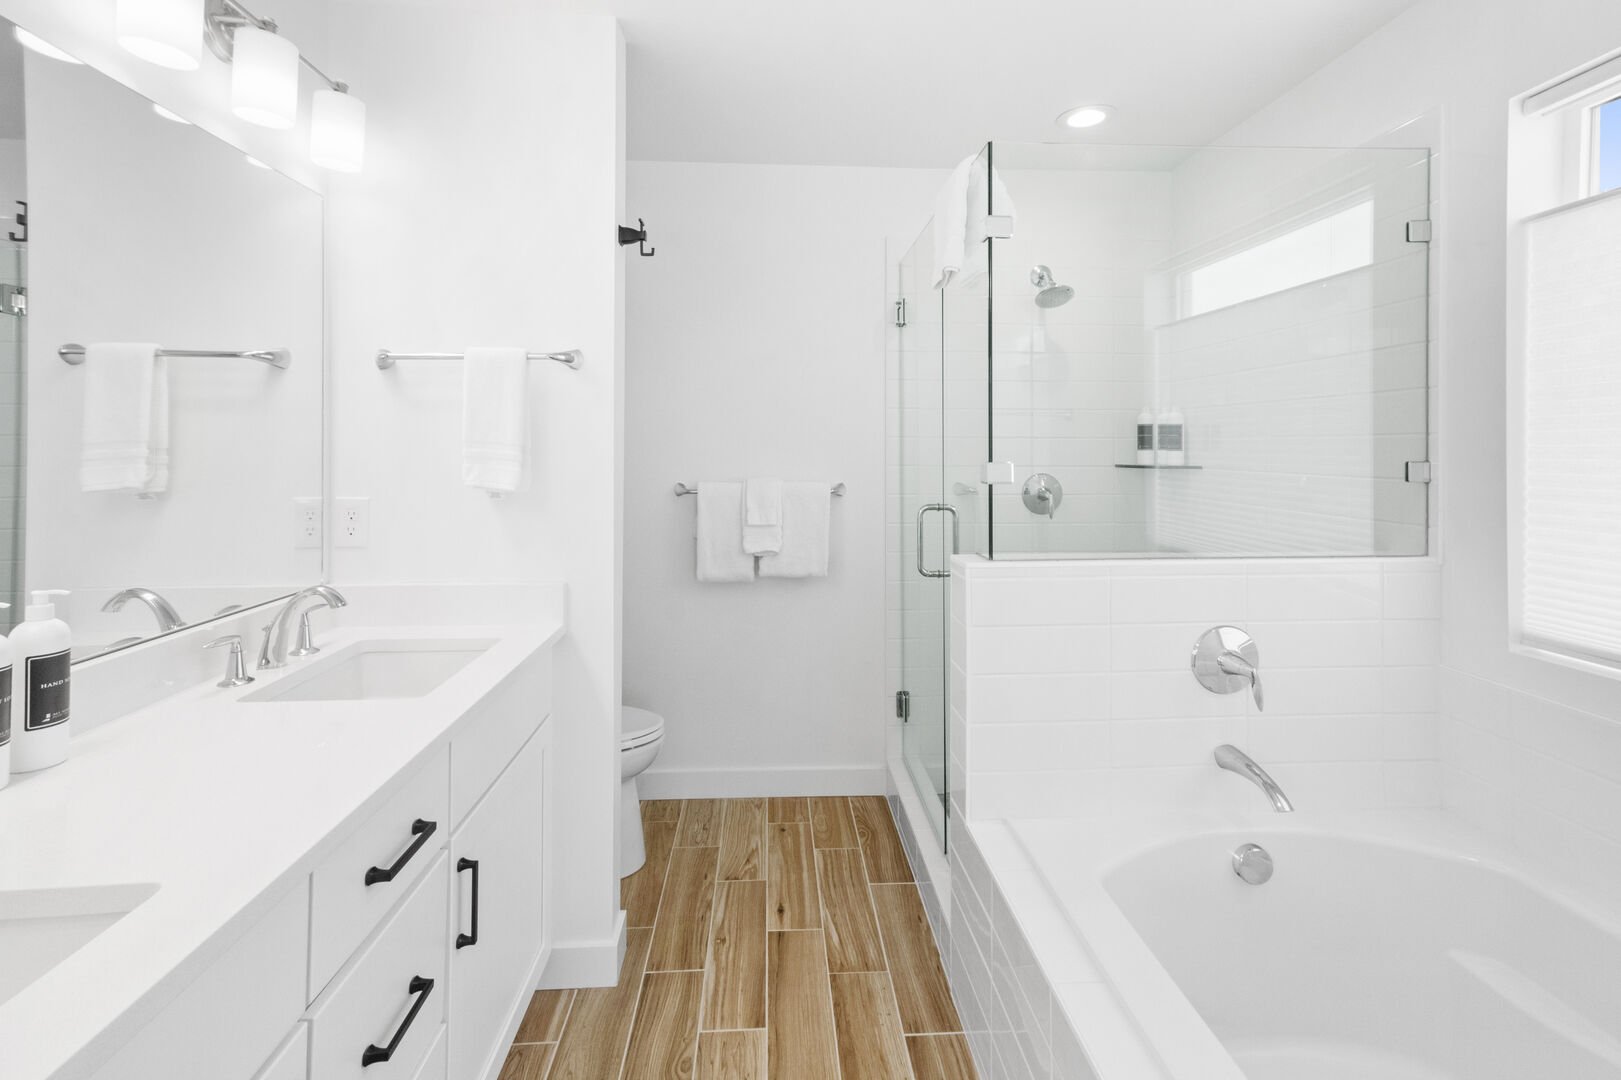 Primary Bathroom with Soaking Tub and Walk-In Shower (top floor)